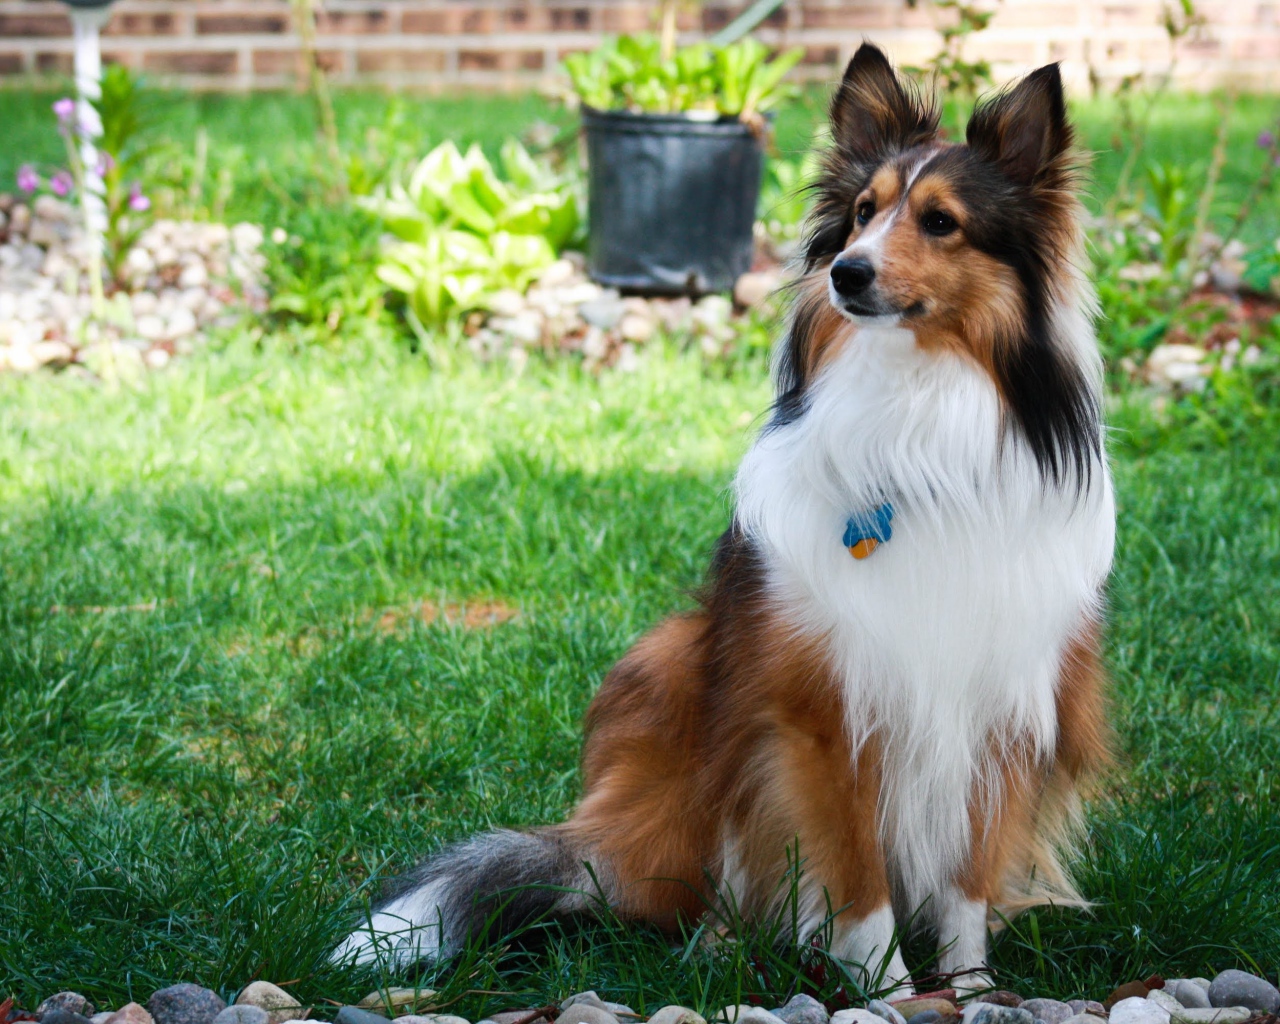 Sheltie breed dog is sitting in the courtyard